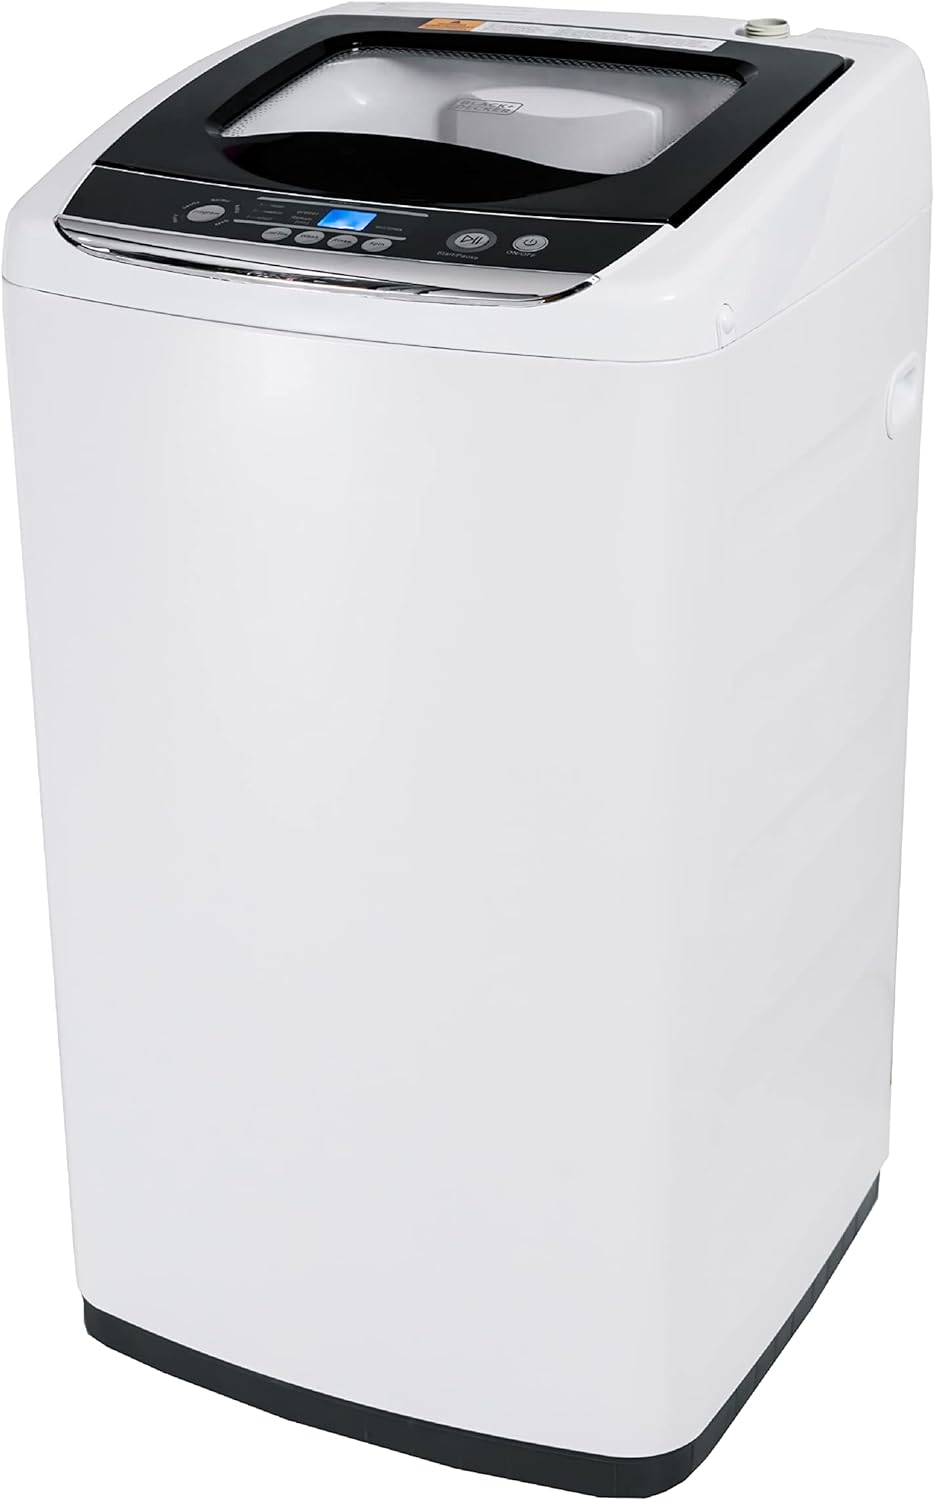 BLACK+DECKER Small Portable Washer, Washing Machine for Household Use, Portable Washer 0.9 Cu. Ft. with 5 Cycles, Transparent Lid  LED Display